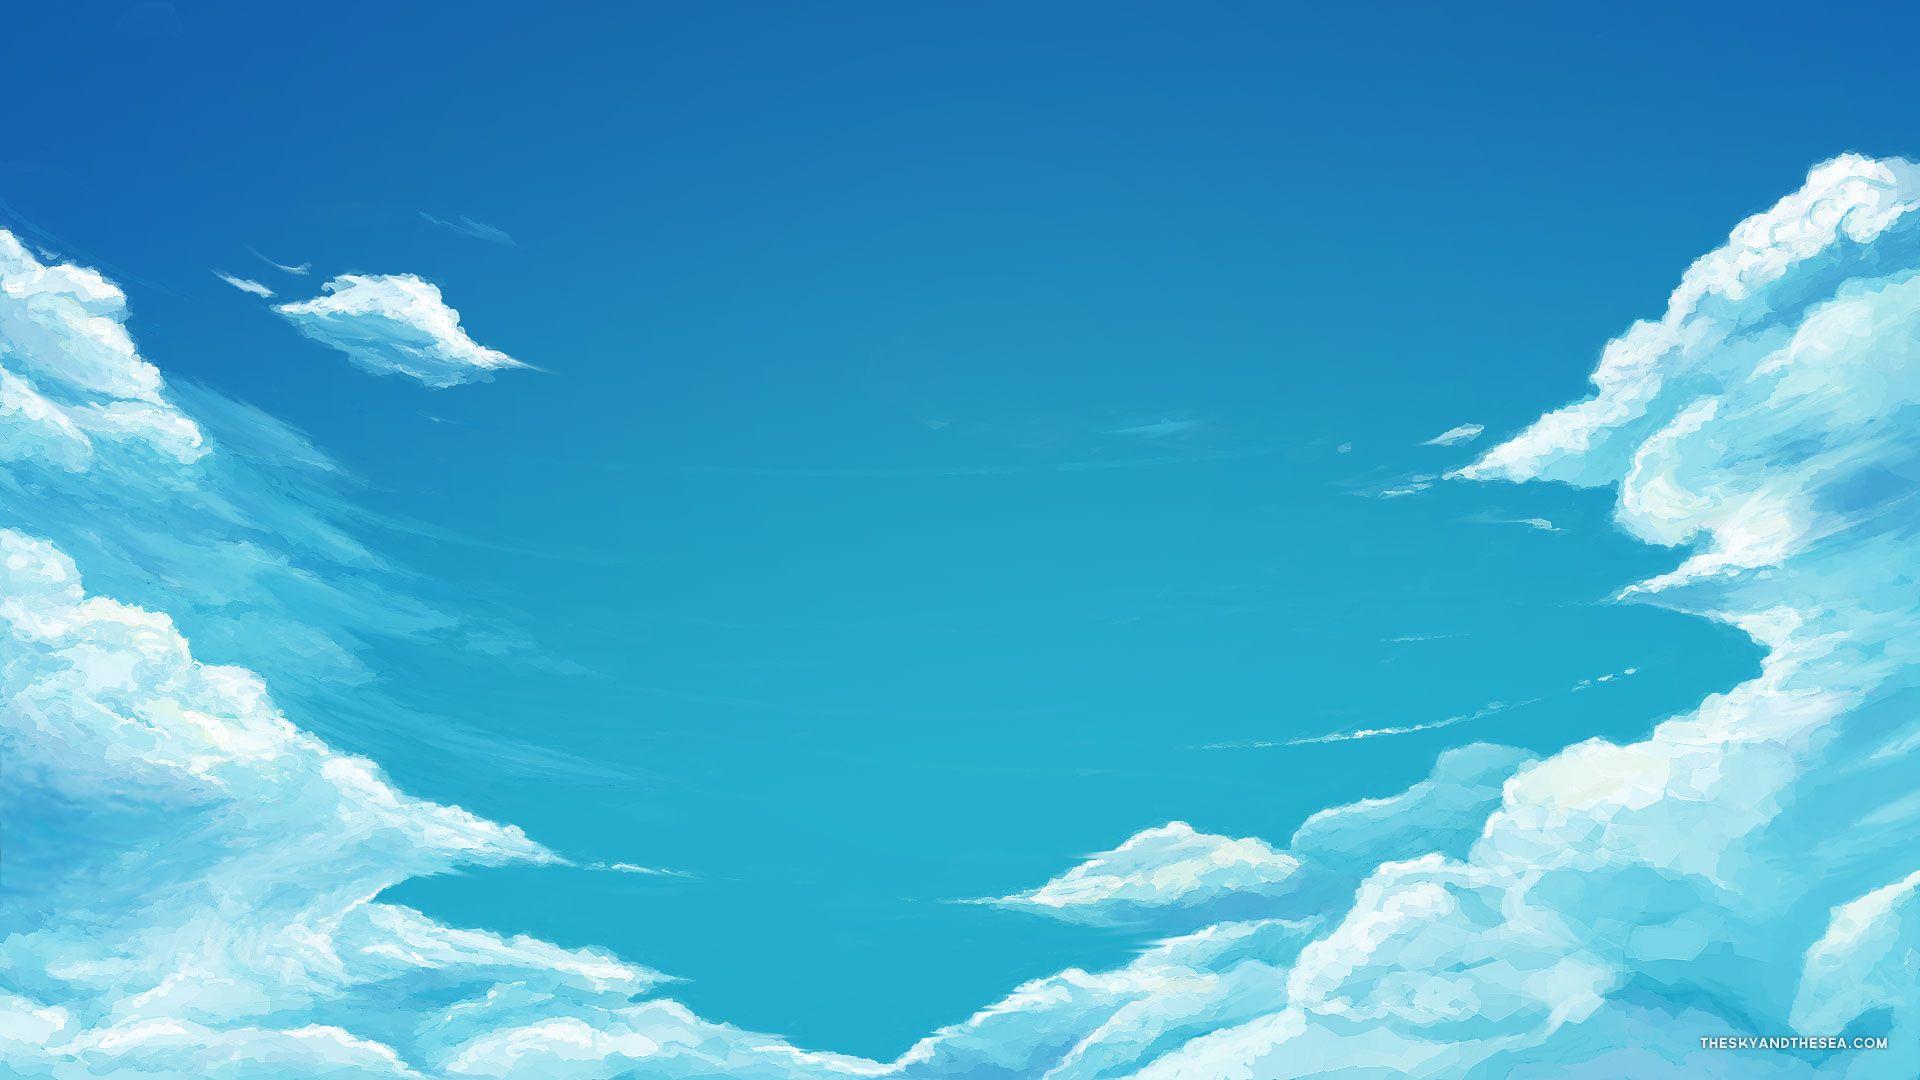 animated clouds background